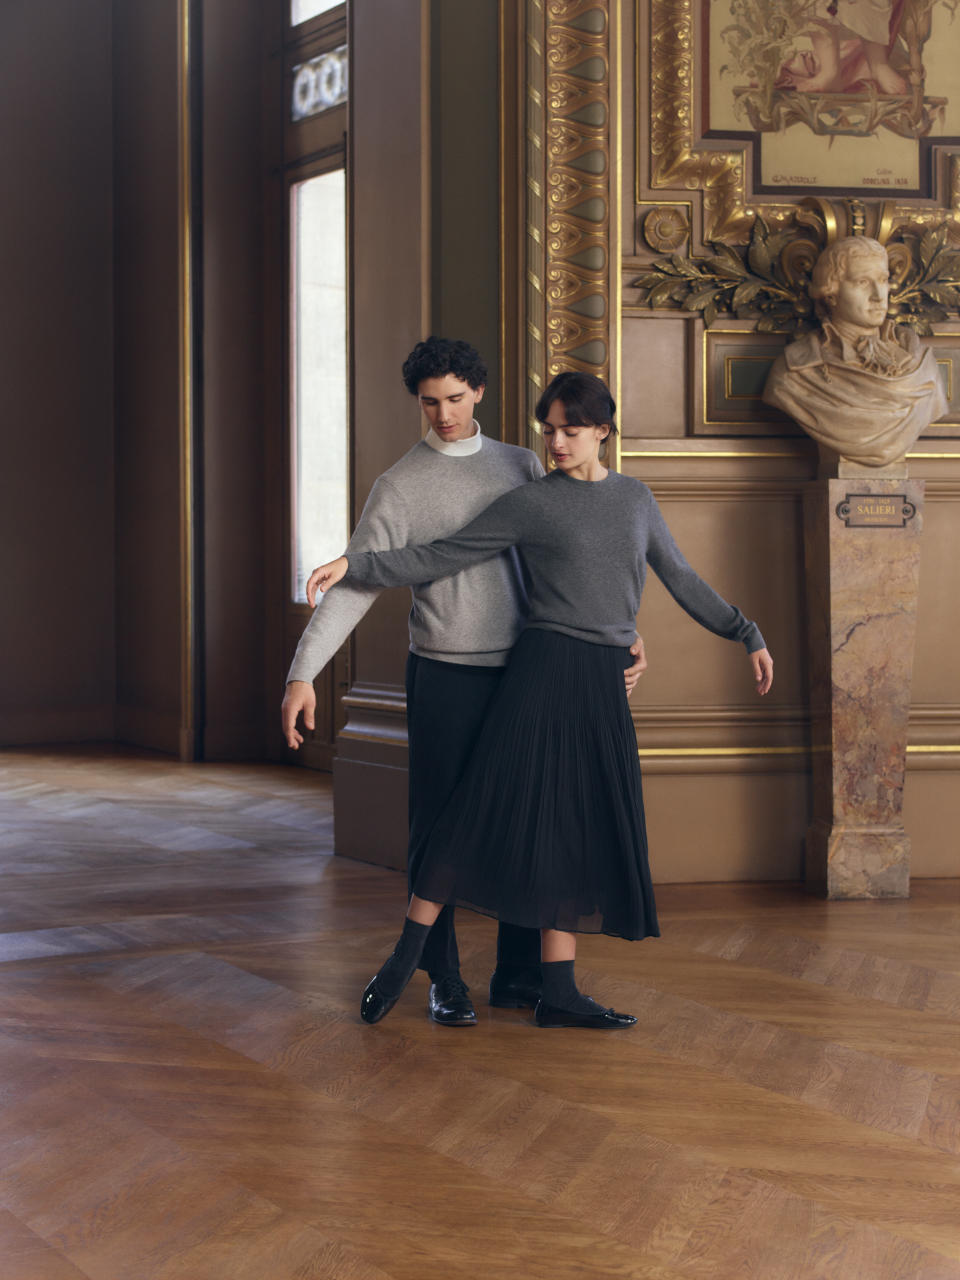 Dancers from the Paris Opéra in the Uniqlo campaign.